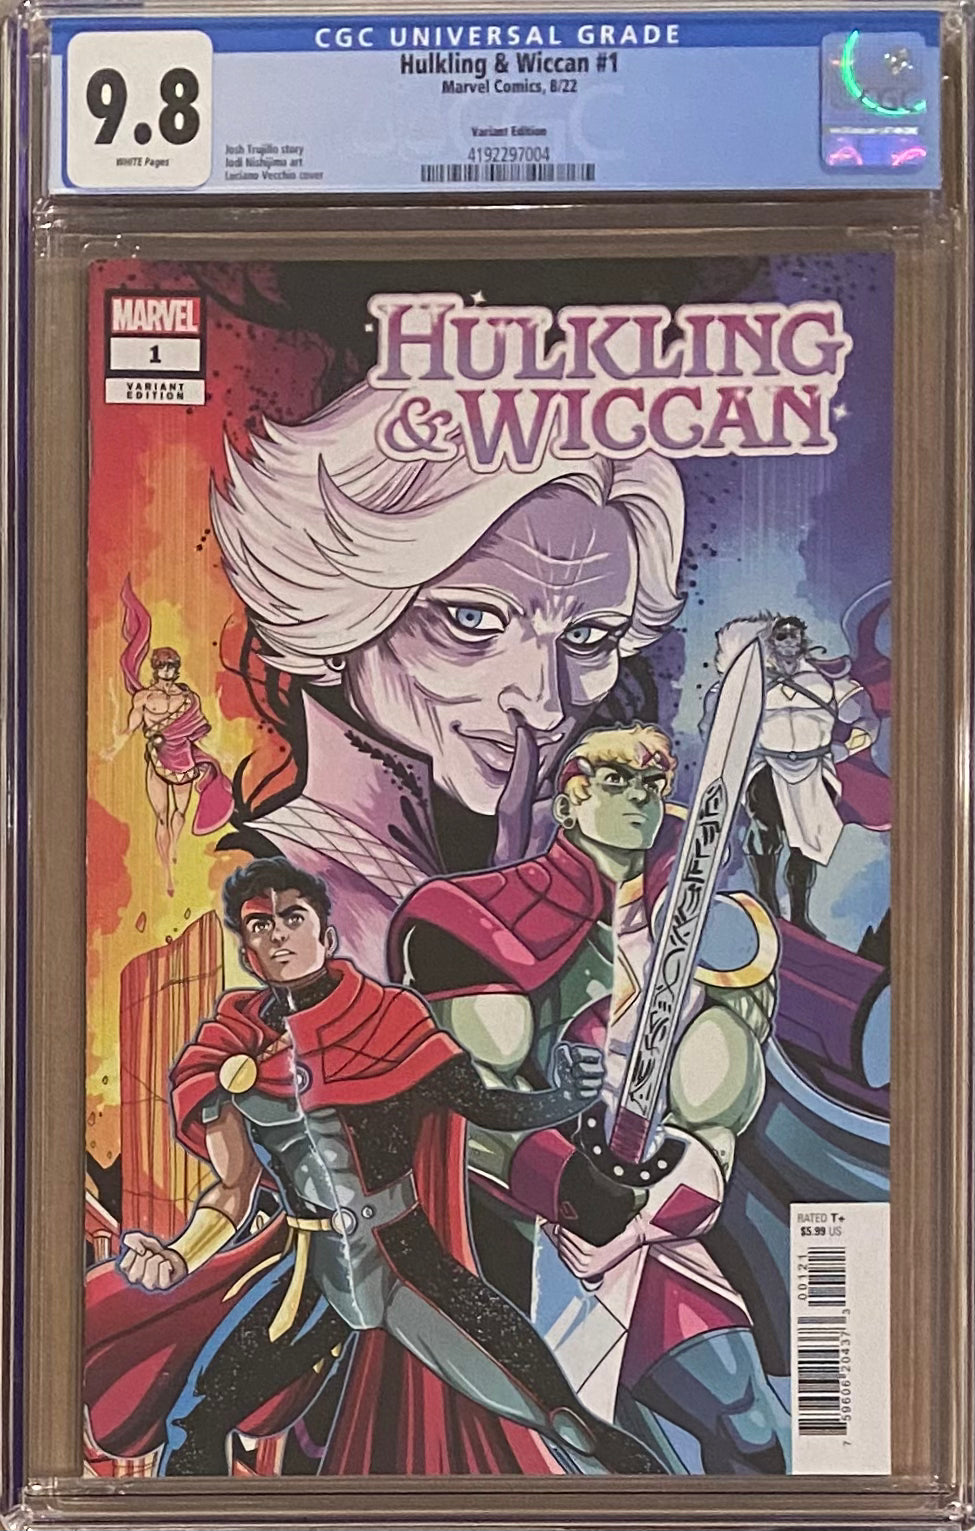 Hulkling & Wiccan #1 Variant CGC 9.8